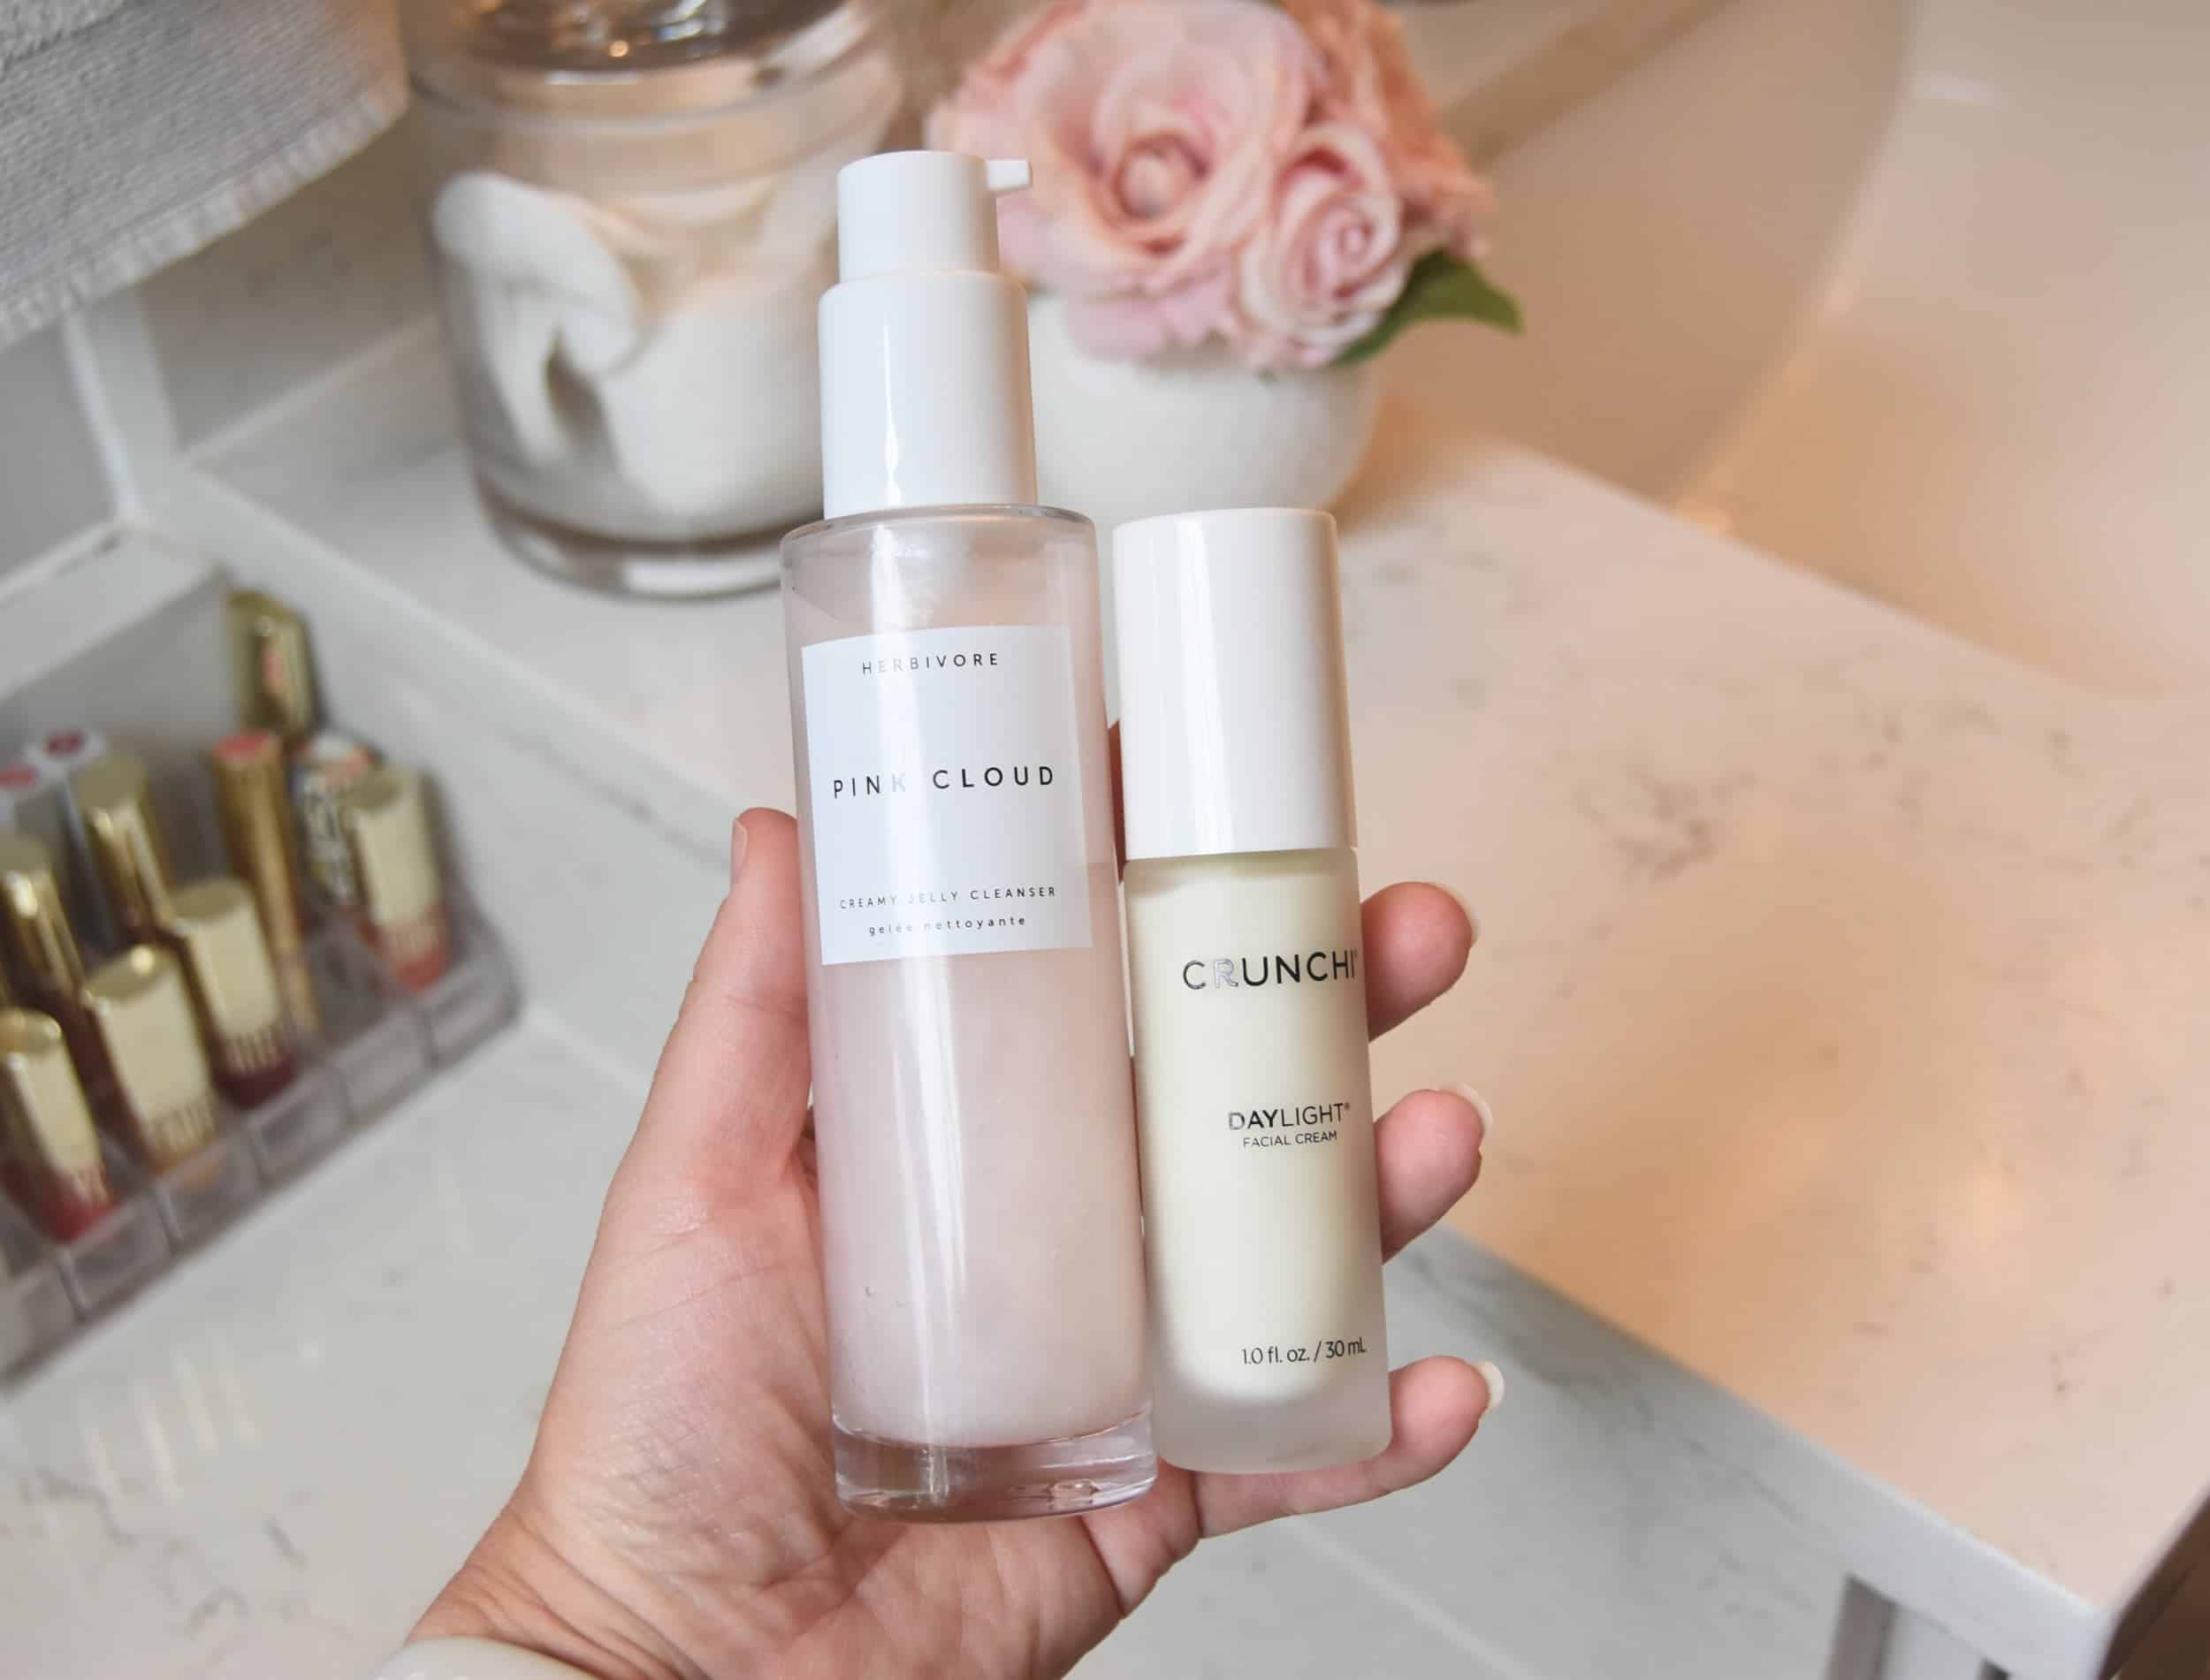 Two alternative products for Beautycounter's countermatch line for dry skin.